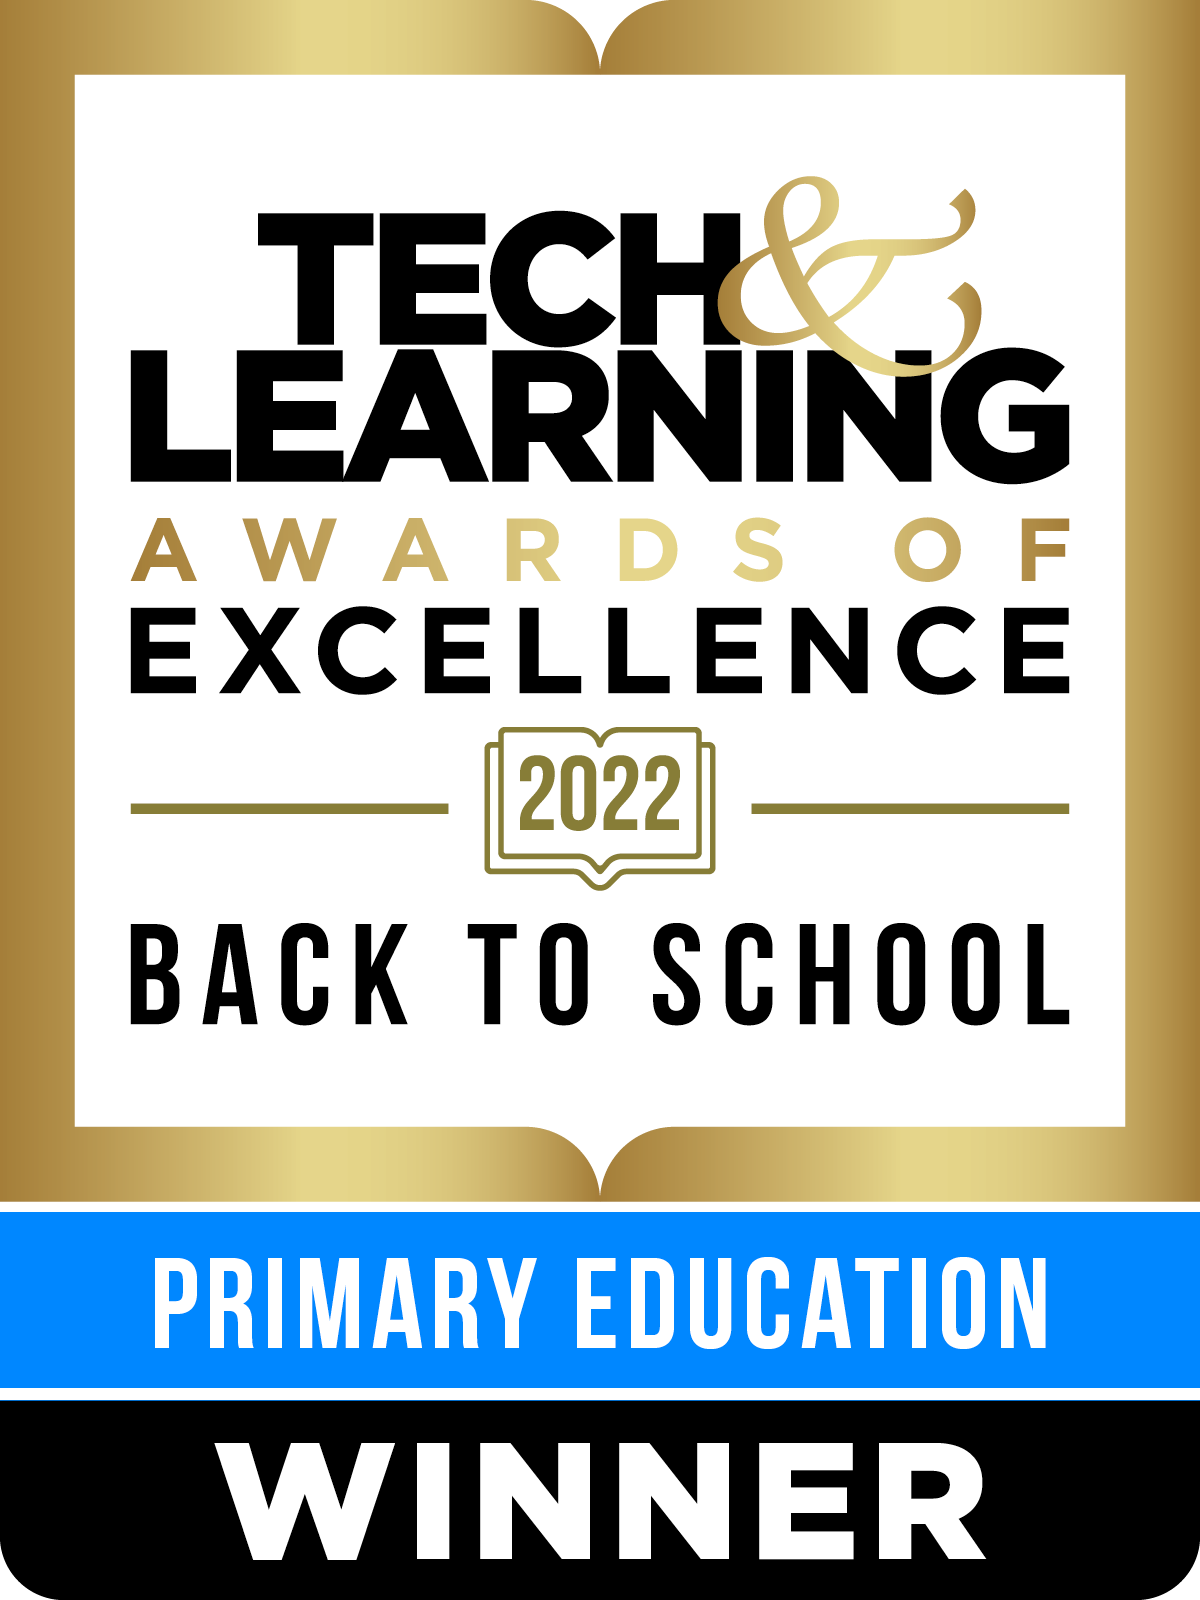 Bloomz Wins Tech & Learning Award of Excellence - Back to School 2022